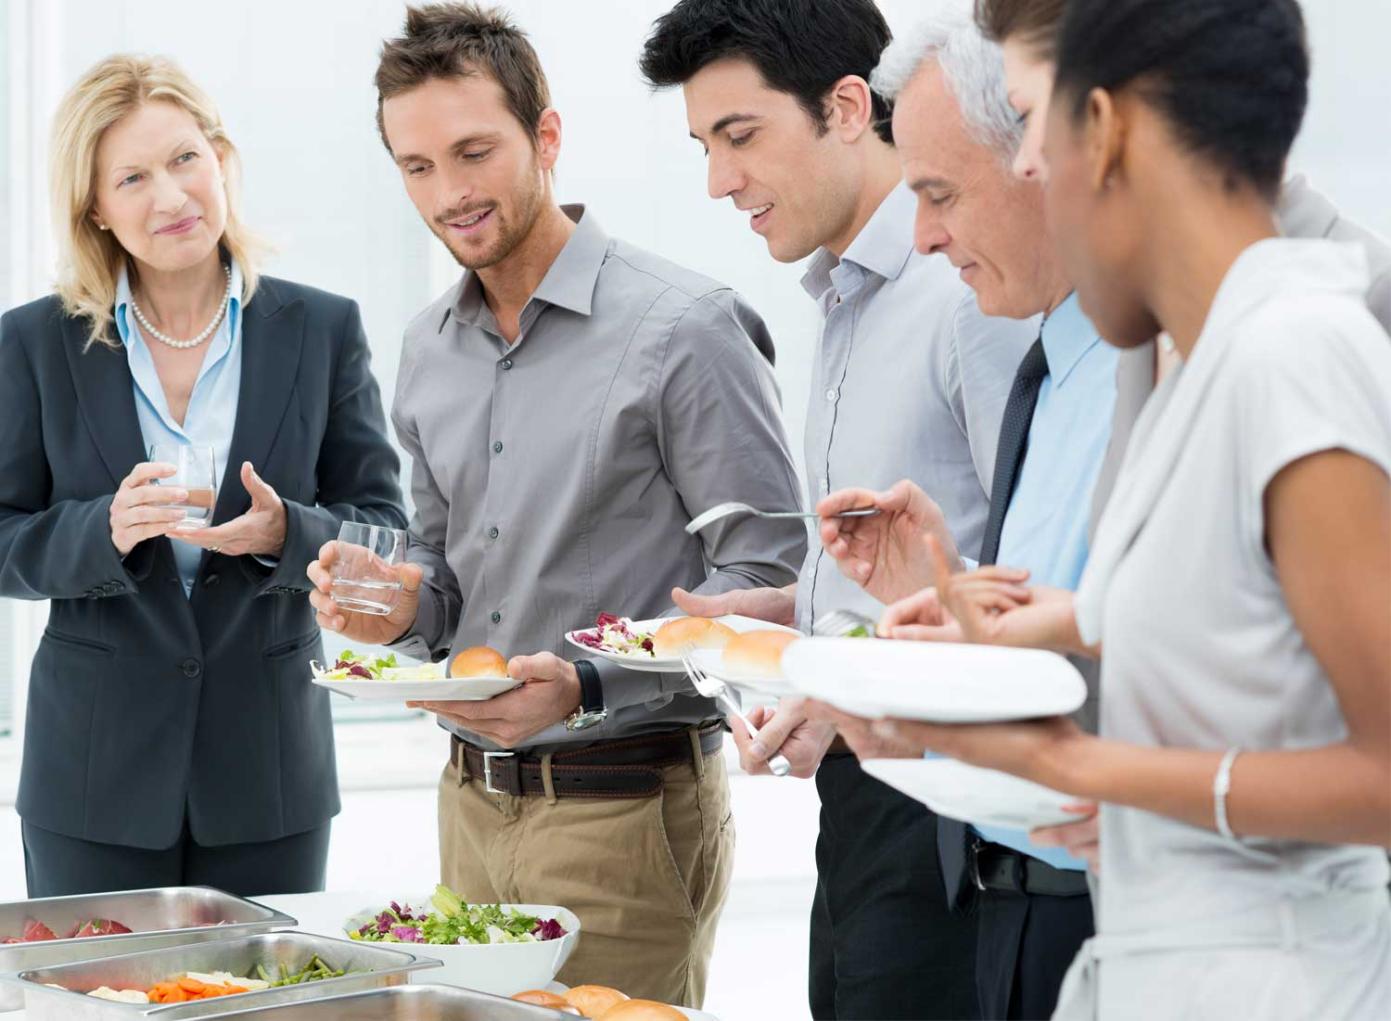 What Are the Different Types of Corporate Catering Services Available?